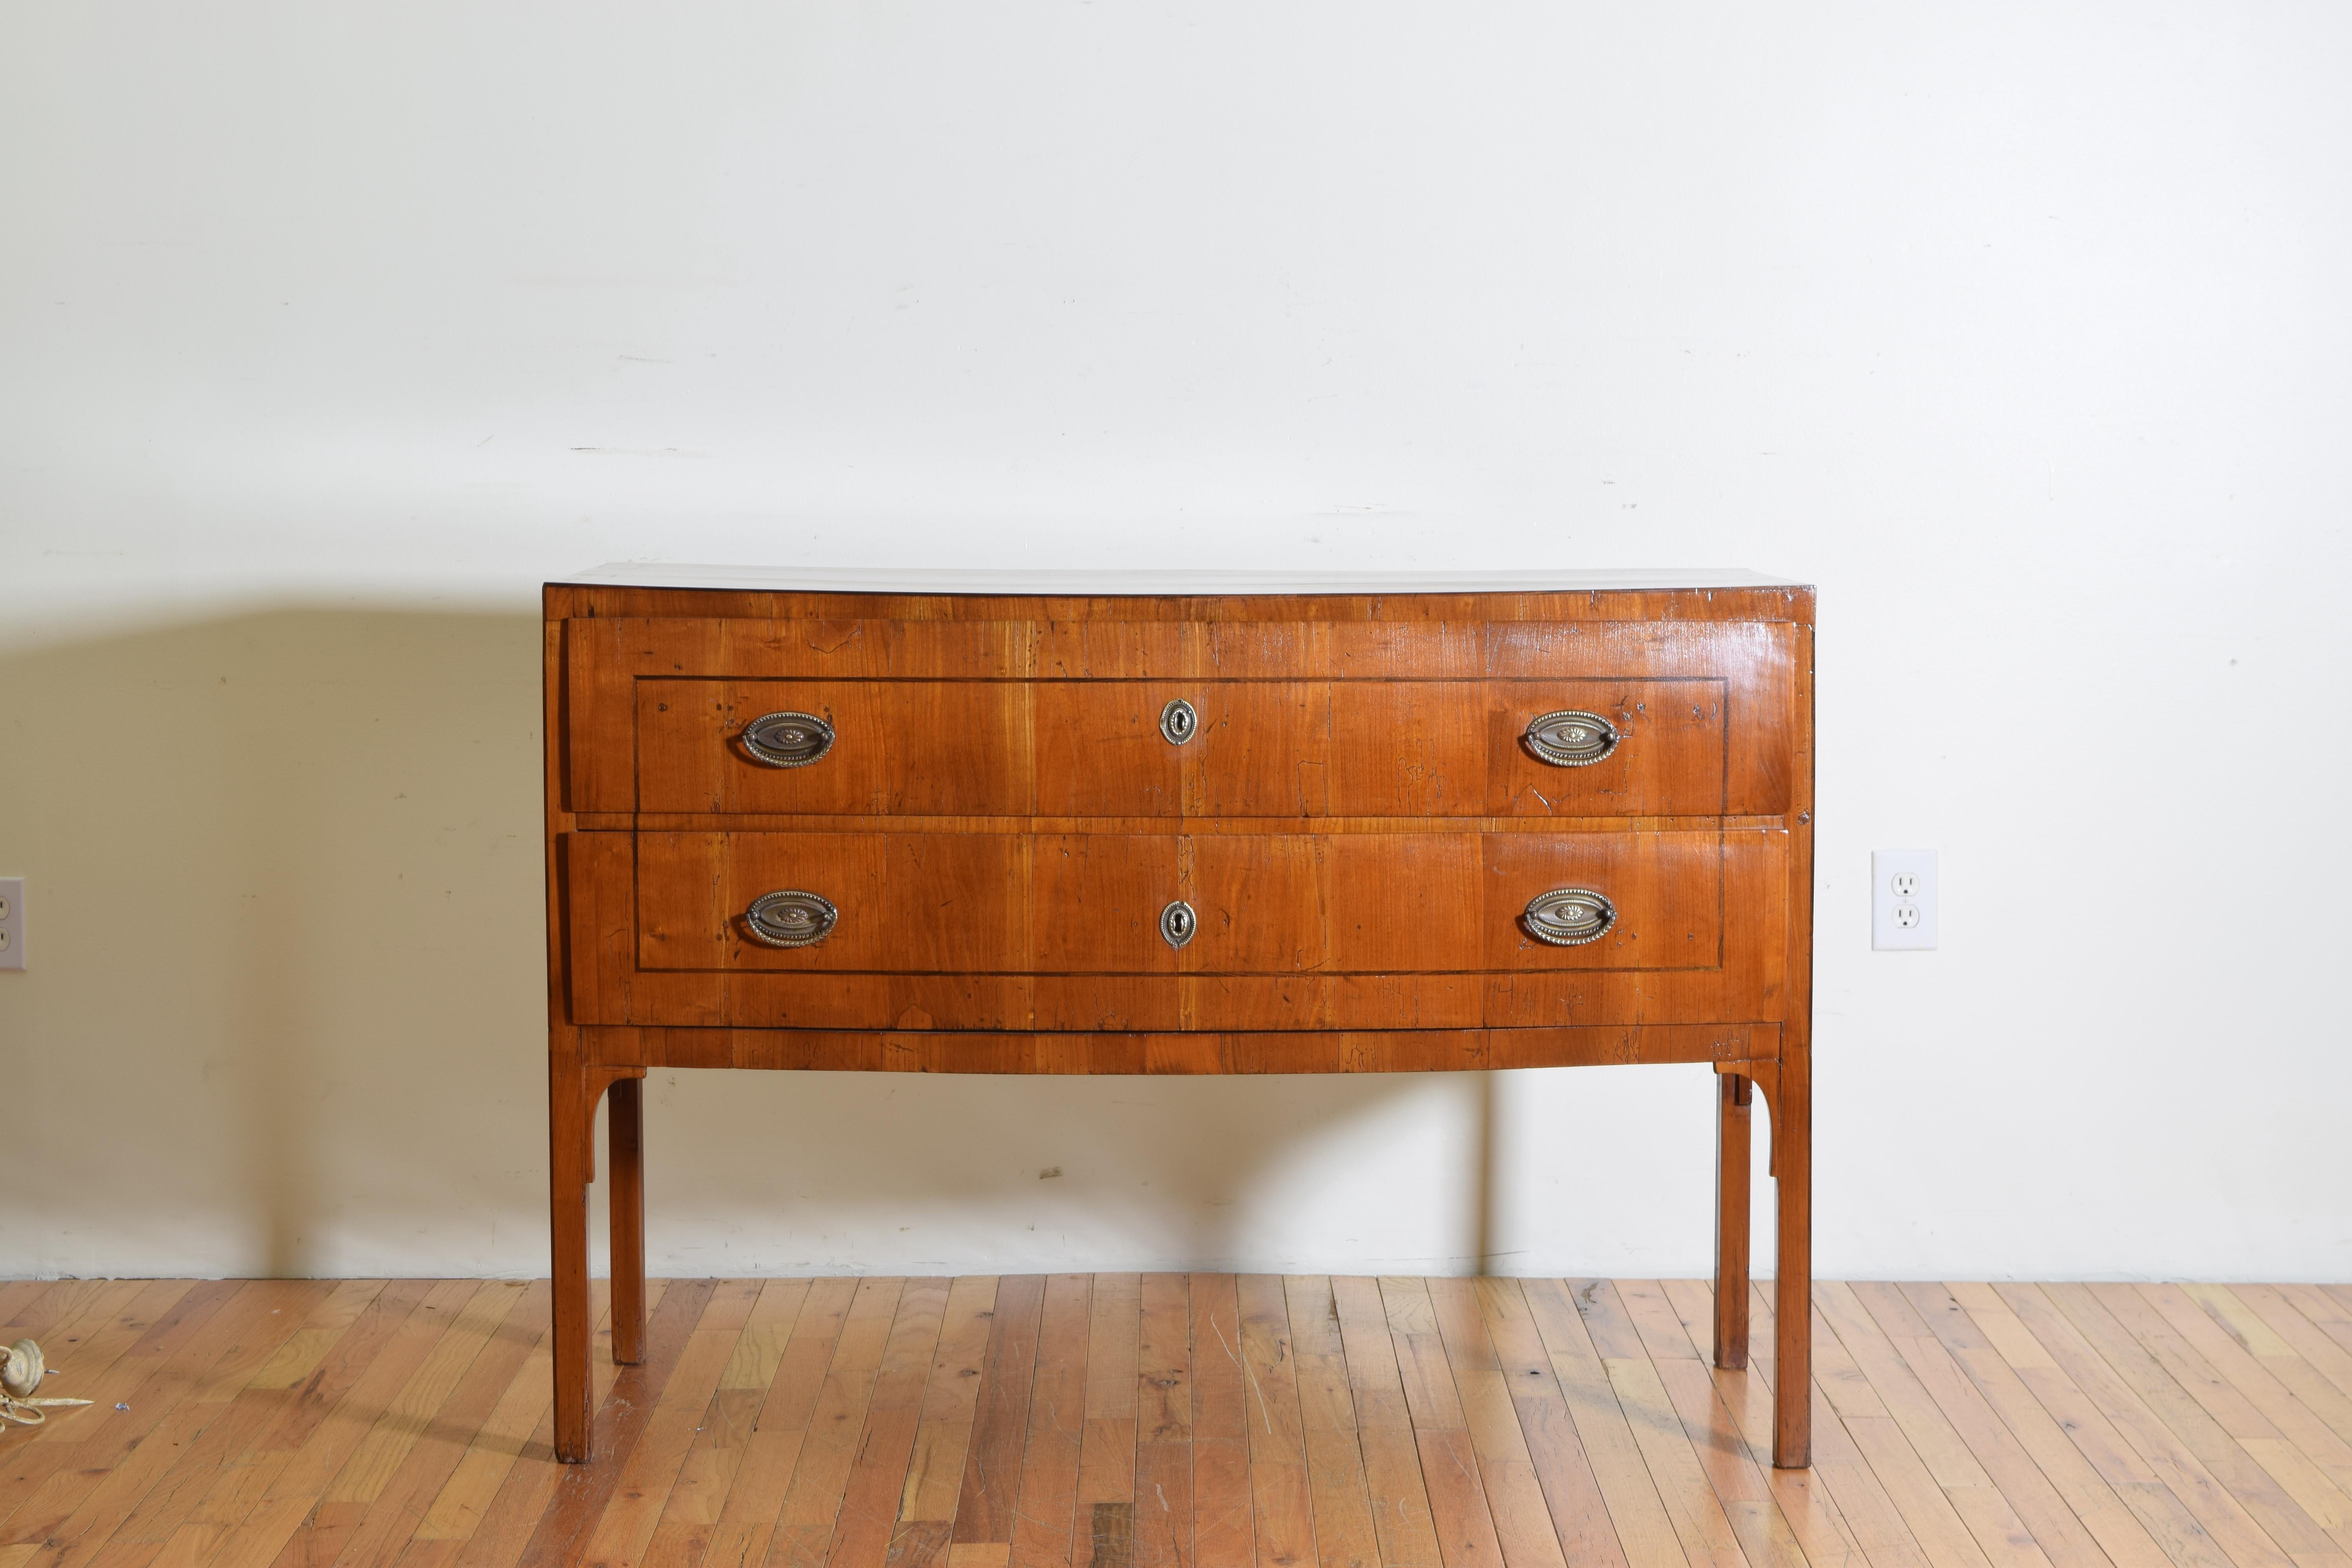 Produced within the first ten years of the early 19th century in the Veneto region of Italy and influenced by the accessibility to the far East that the Adriatic Sea provided, this bowfront 2-drawer cherrywood veneered commode is raised on straight